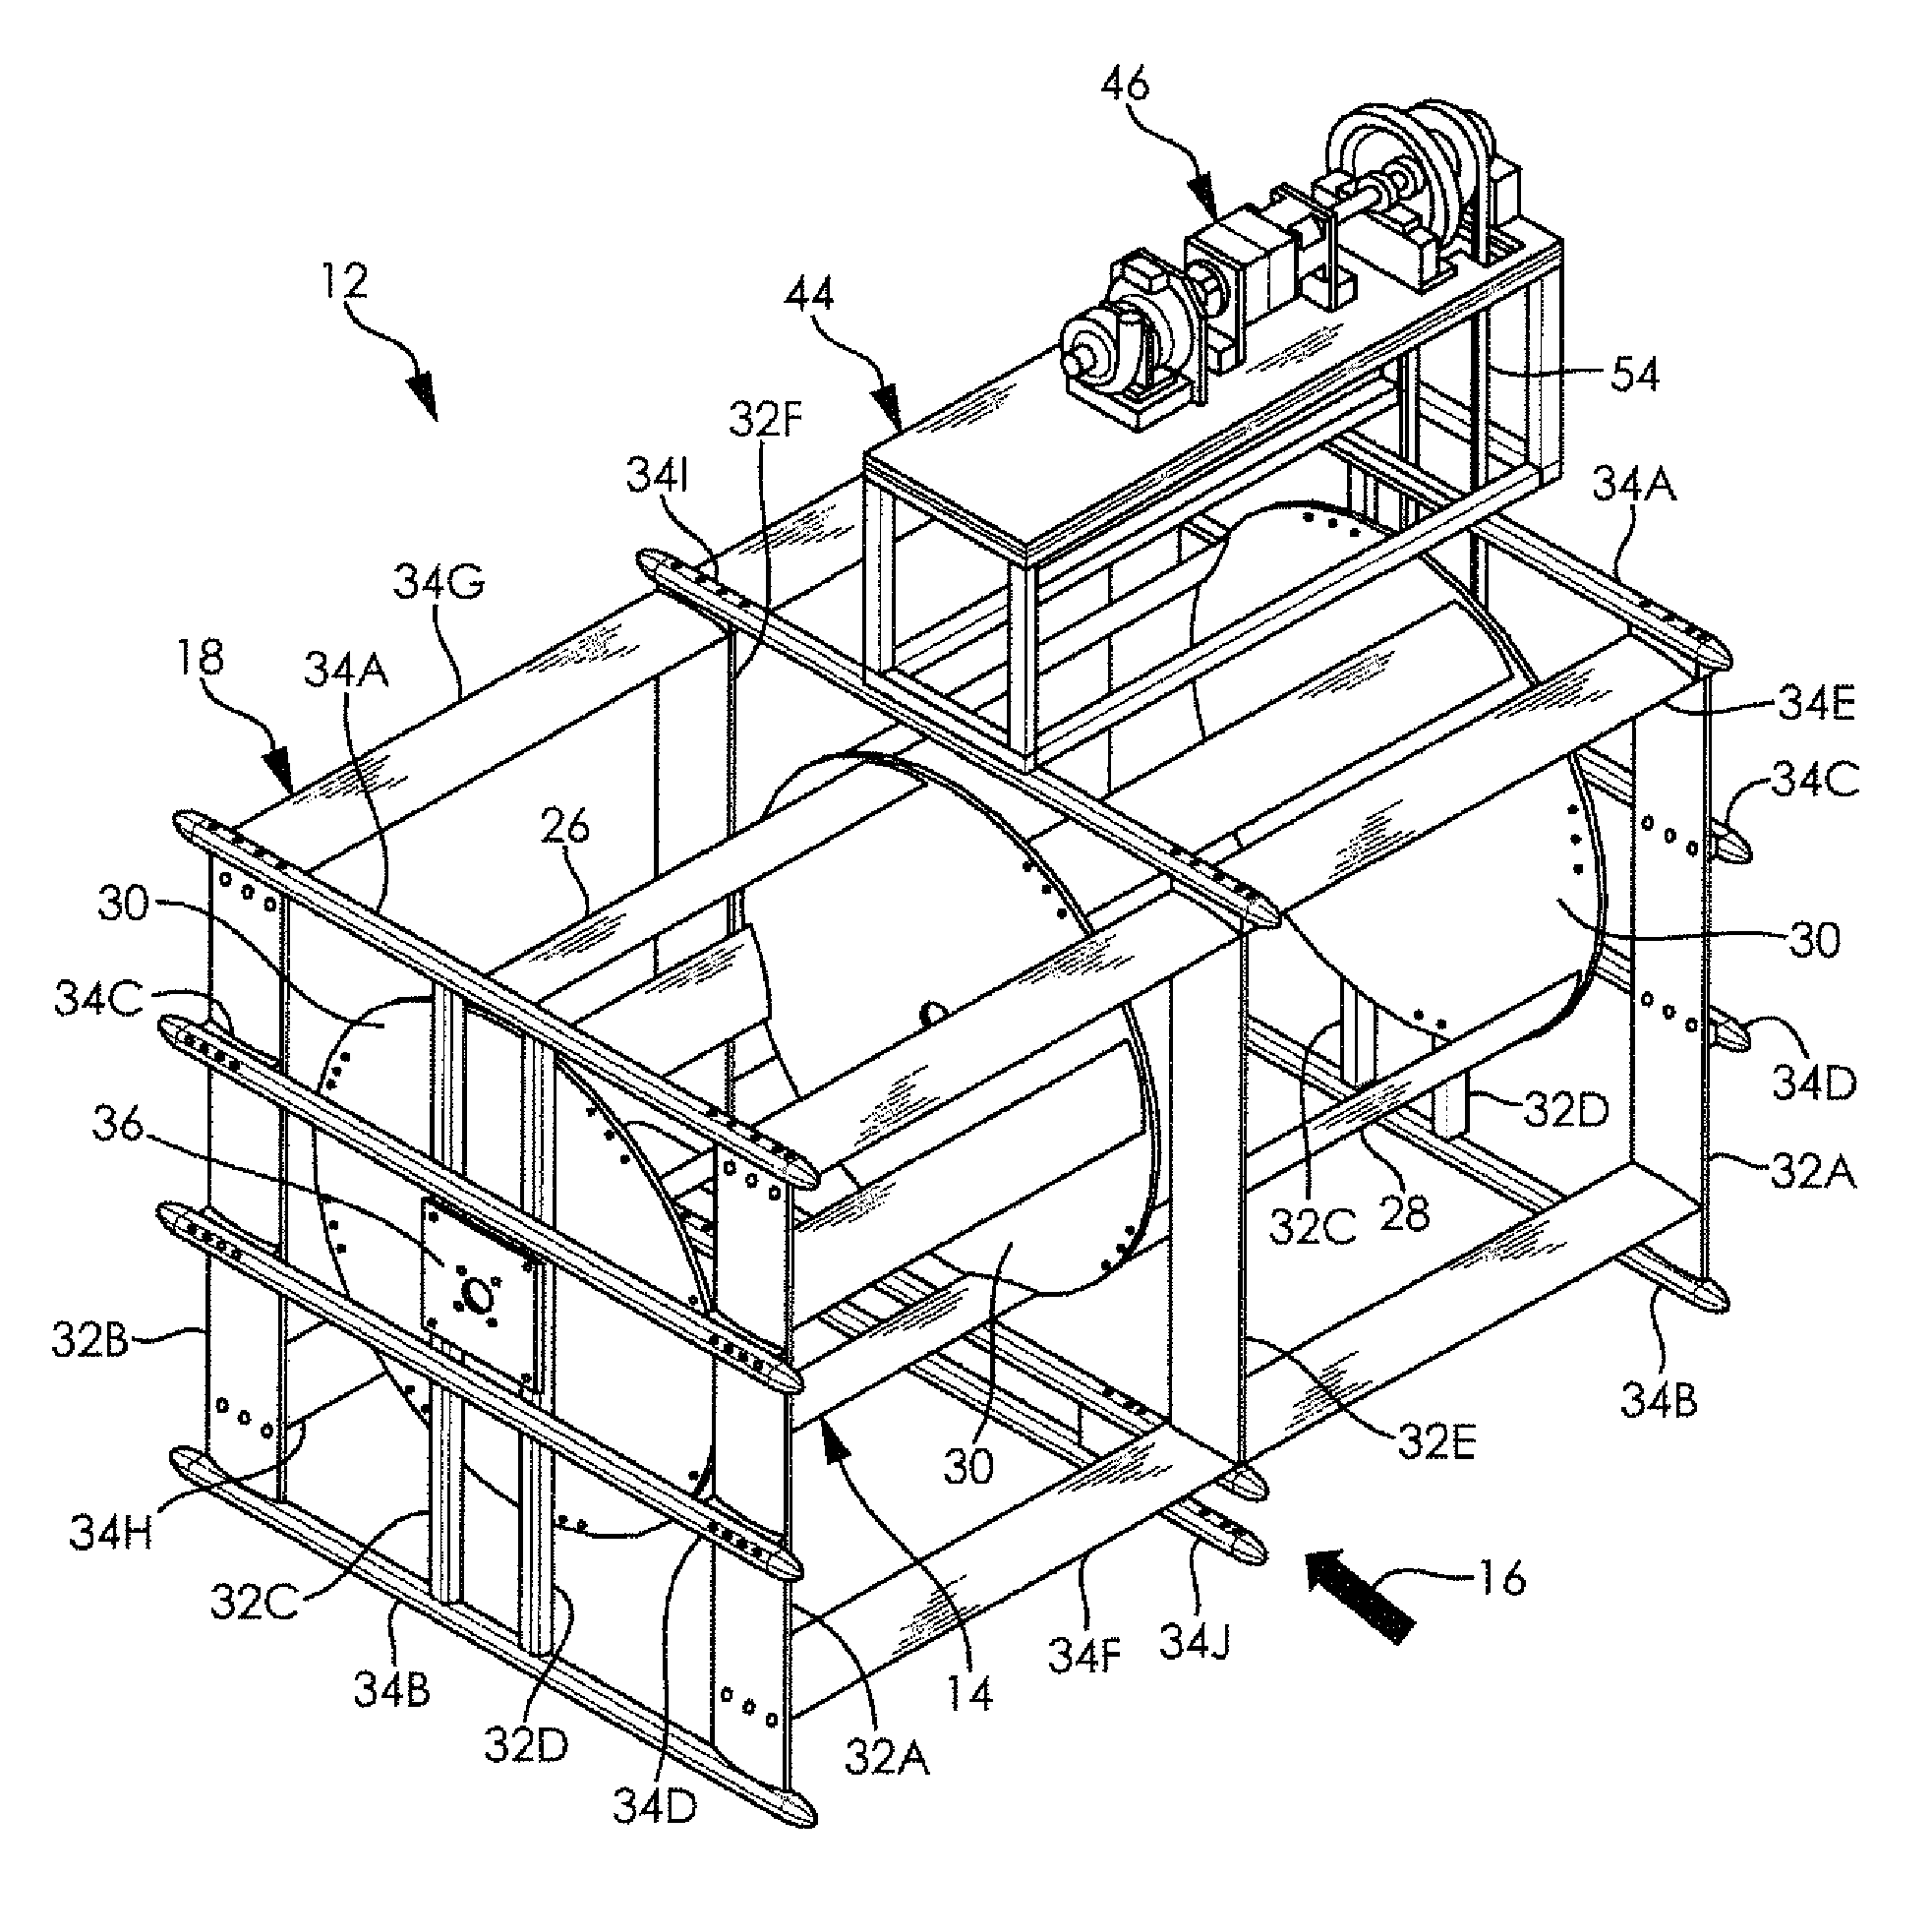 Horizontal-axis hydrokinetic water turbine system